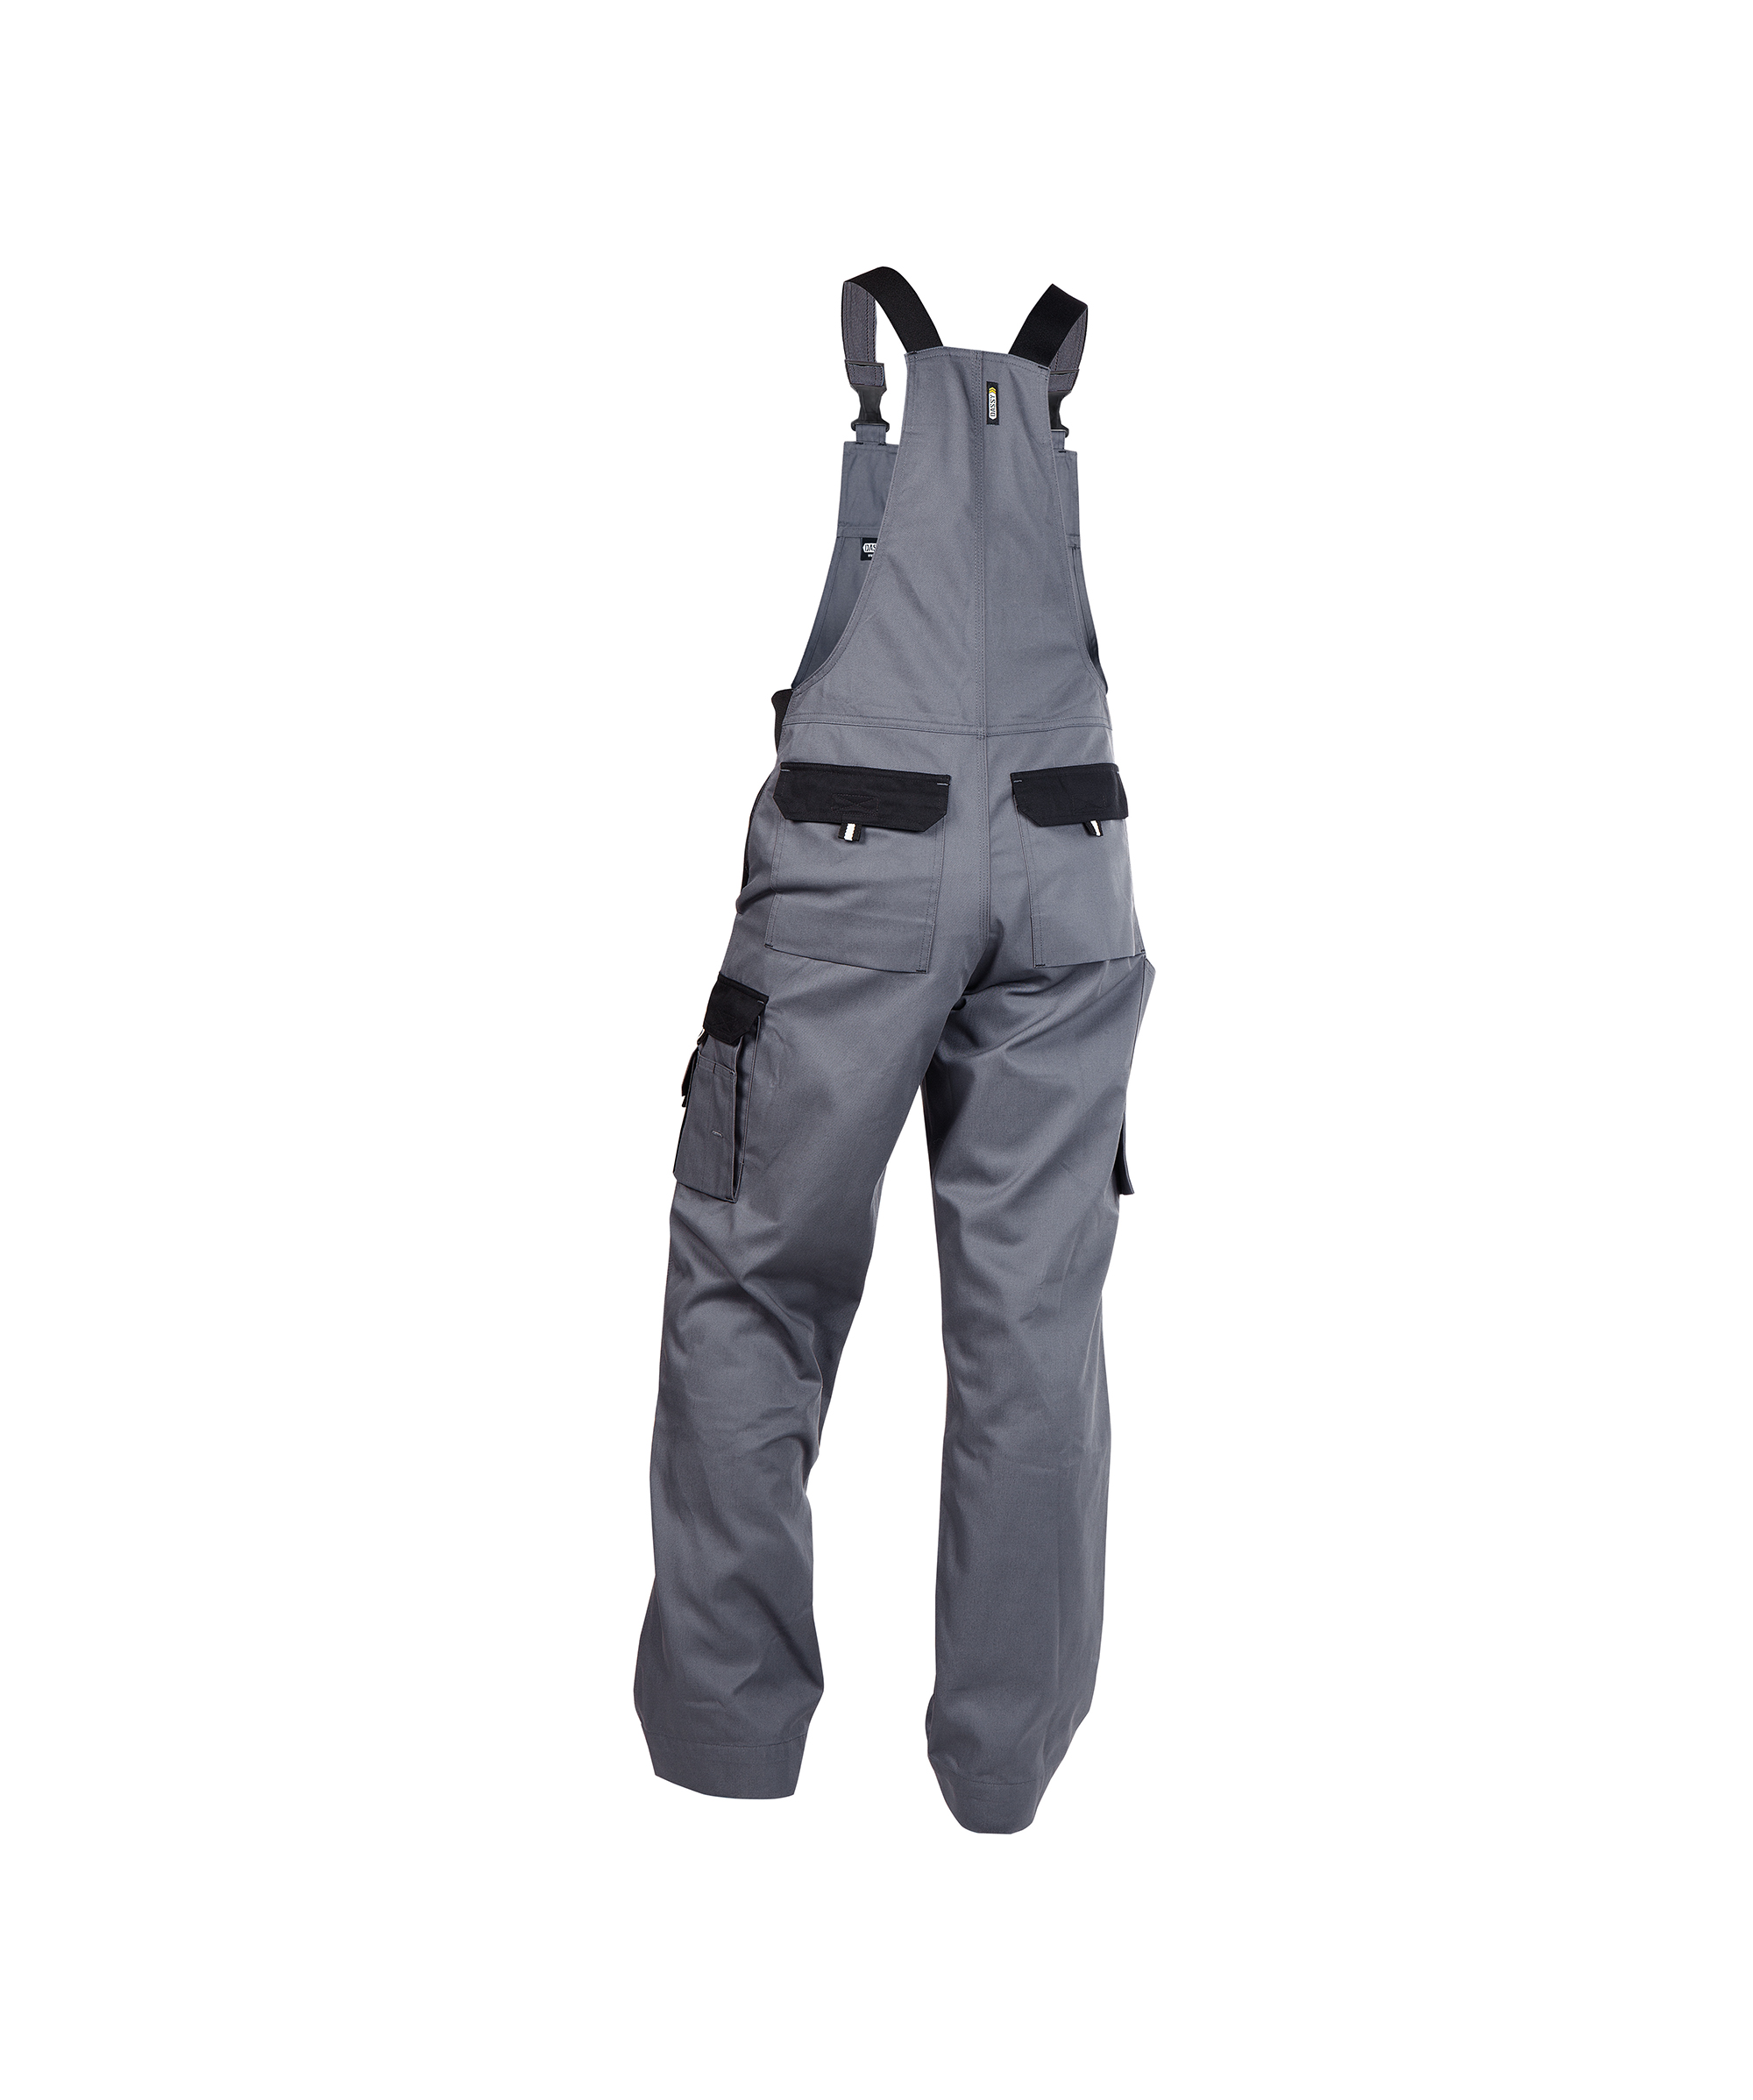 calais_two-tone-brace-overall_cement-grey-black_back.jpg